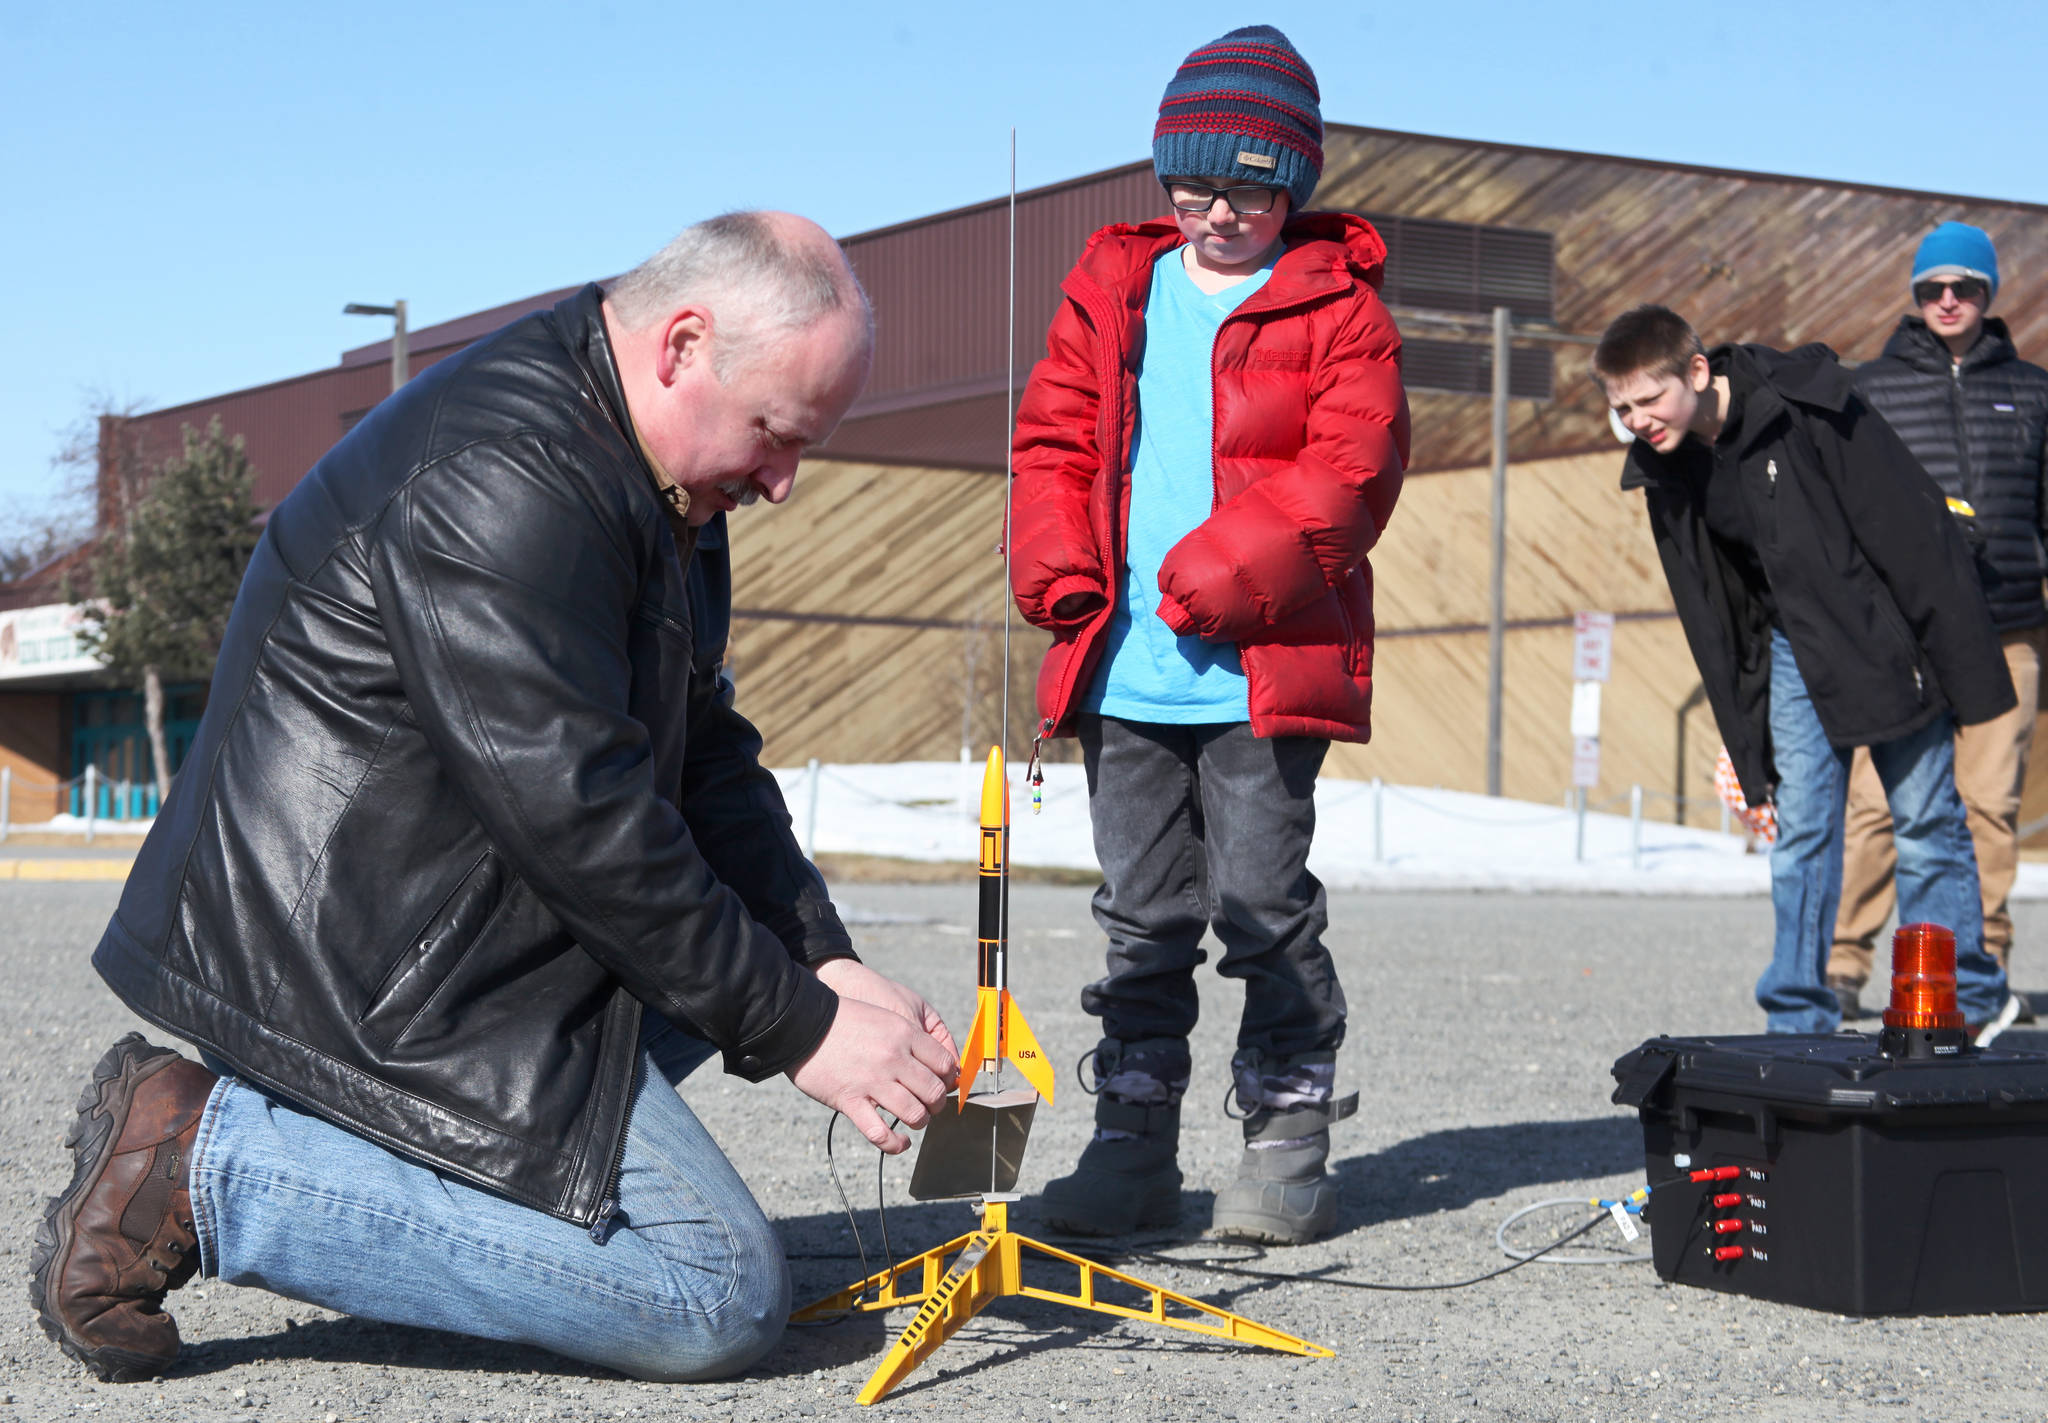 Scott Aleckson (left) clips wires to the ignition contacts of a model rocket while students at his model rocketry session observe in the parking lot of the Soldotna Regional Sports Complex in Soldotna, Alaska on Saturday, May 31, 2018. Aleckson said he made and launched his first plastic, balsa wood, and cardboard rocket as a 4th grade student at Soldotna Elementary School. Since then he’s built a custom launch system, he said, “with recycled electronics and a lot of soldering time.” Aleckson taught Saturday’s rocketry class through the Soldotna Community Schools program, and said he’d like to continue spreading the hobby. “If I could get a model rocket club going, that’d be great,” he said. “Stuff like this is much more fun in a group.” (Photo by Ben Boettger/Peninsula Clarion)